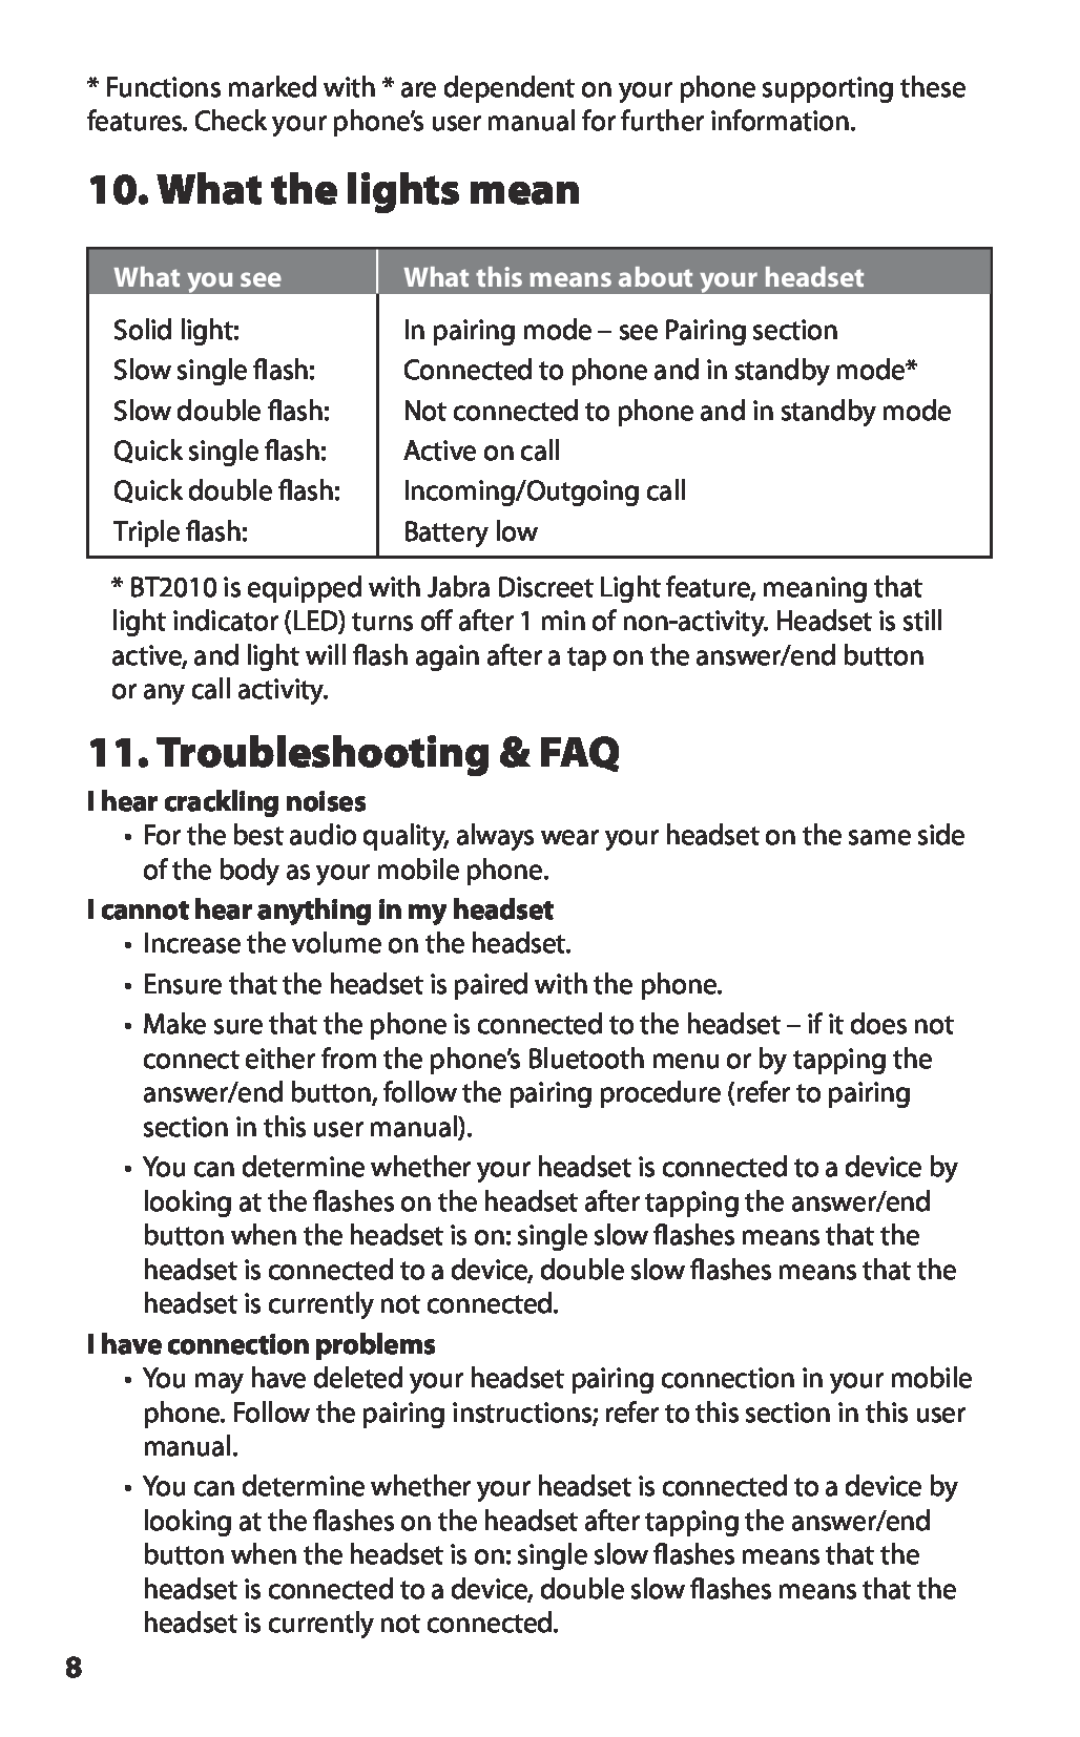 Lennox Hearth BT2010 manual What the lights mean, Troubleshooting & FAQ, What you see, What this means about your headset 